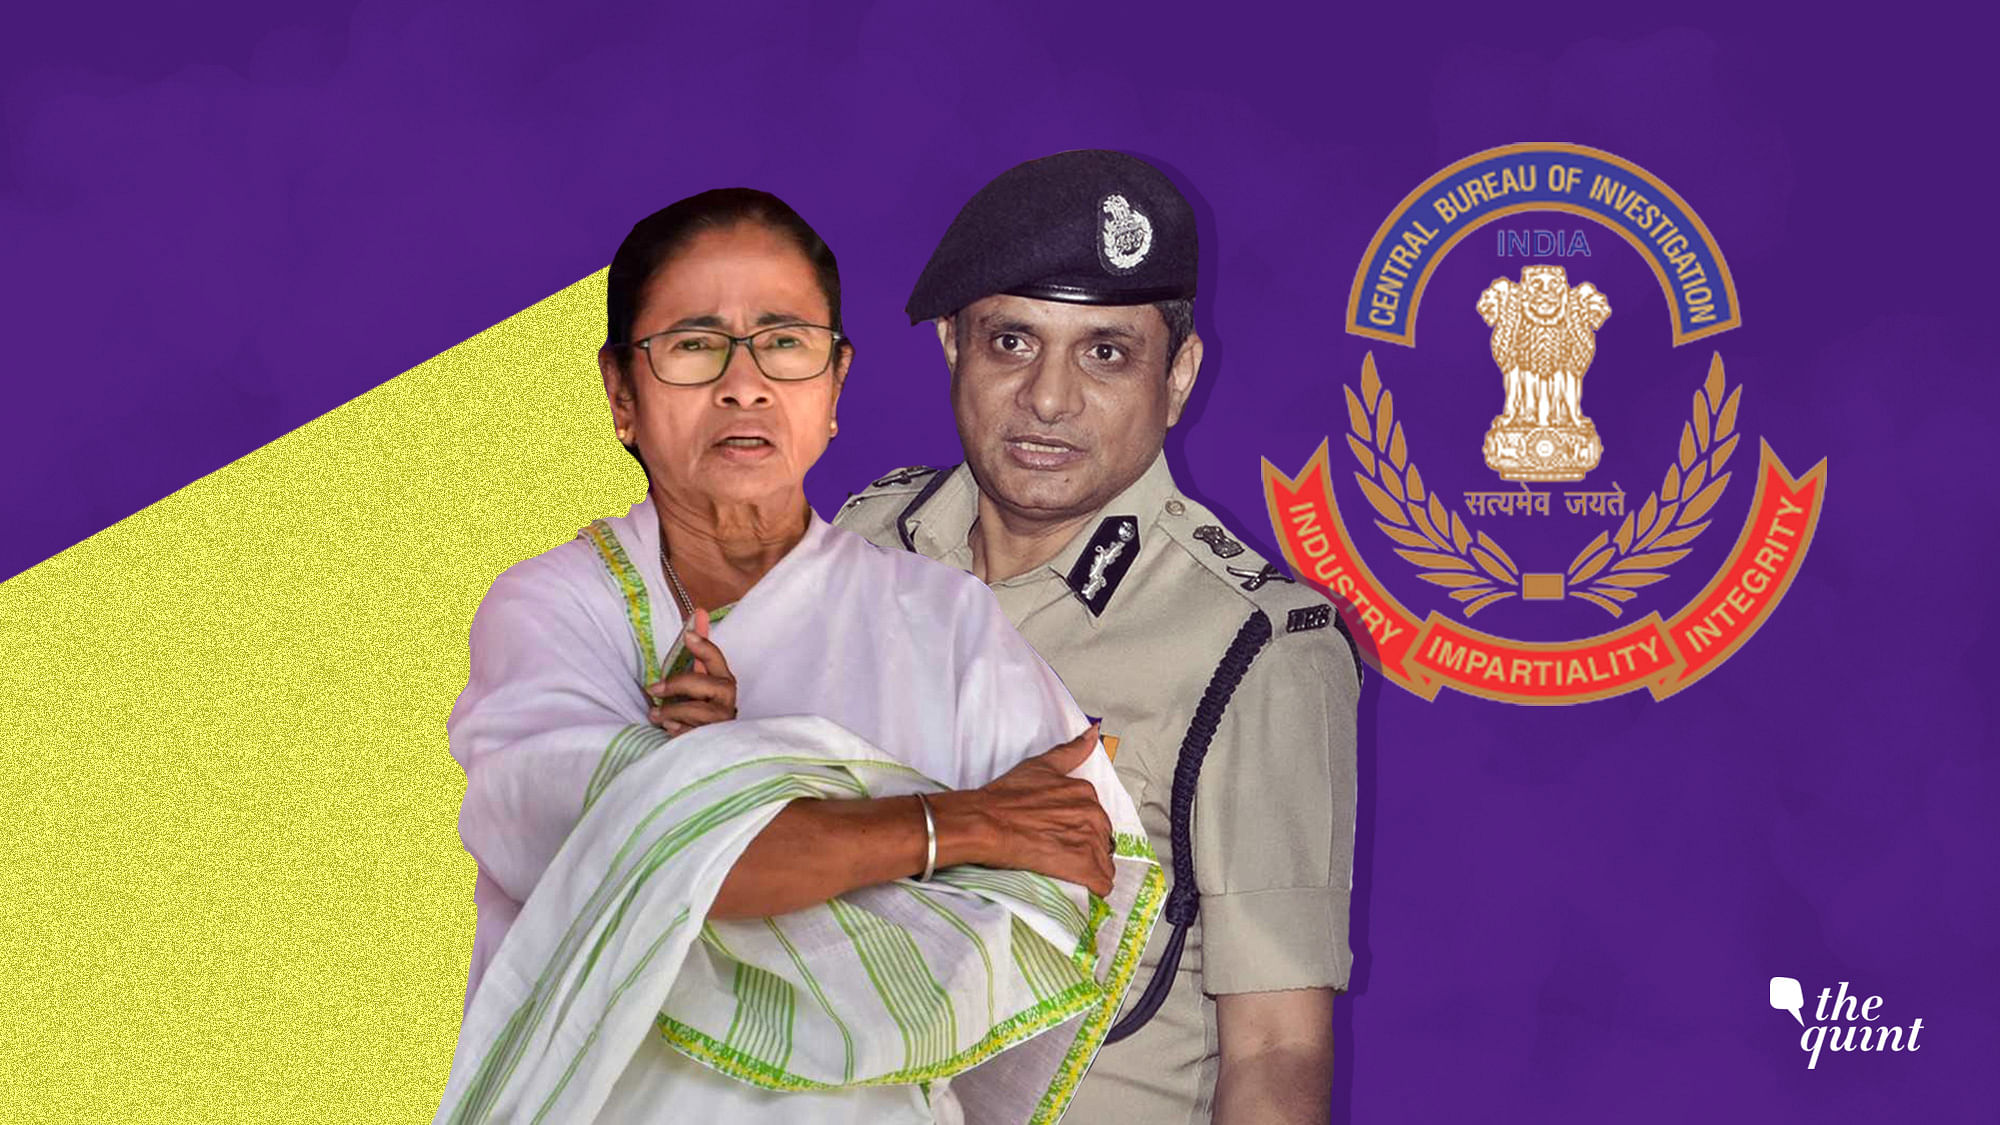 Unprecedented drama unfolded in Kolkata after CBI officials reached Rajeev Kumar’s residence last week, prompting Mamata Banerjee to sit on a three-day dharna.